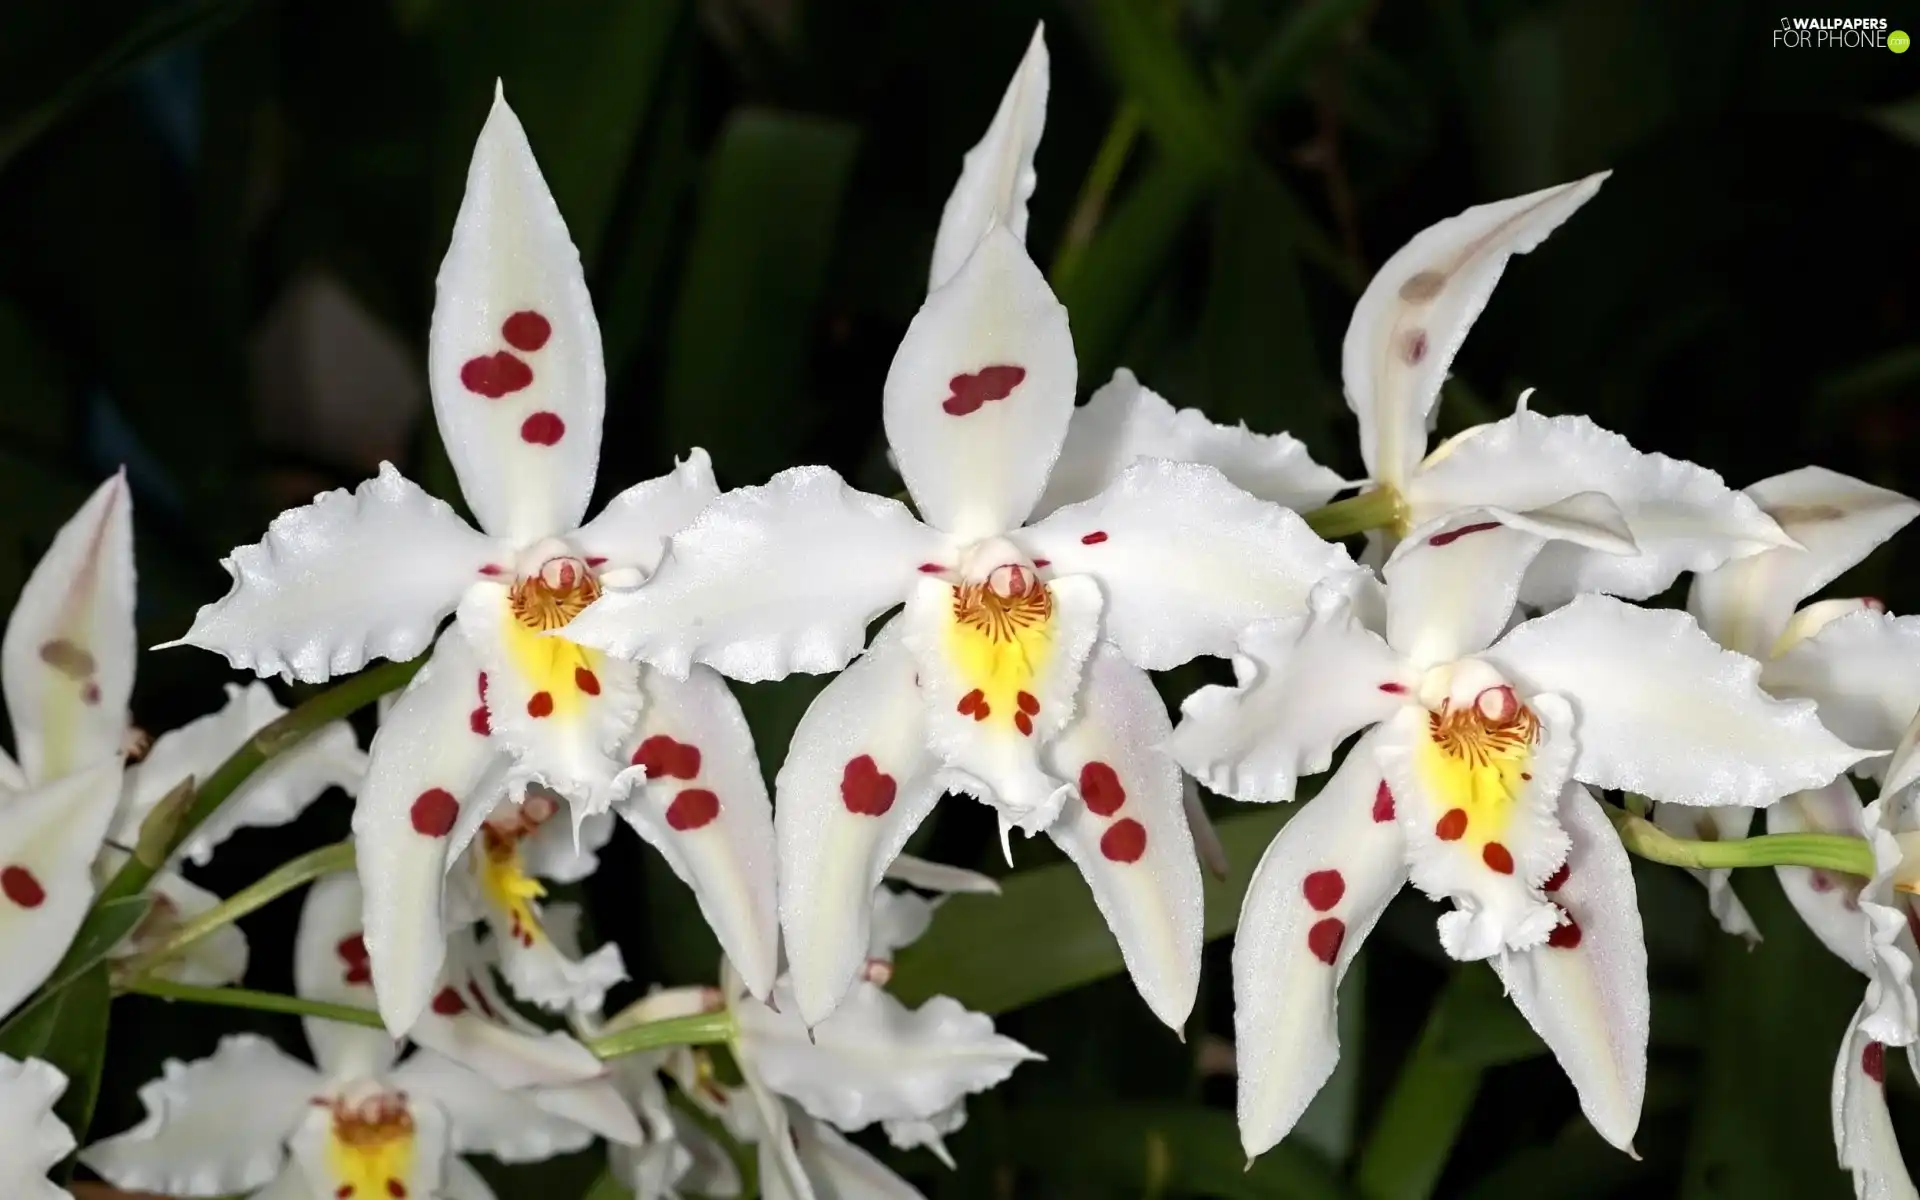 orchids, Flowers, White